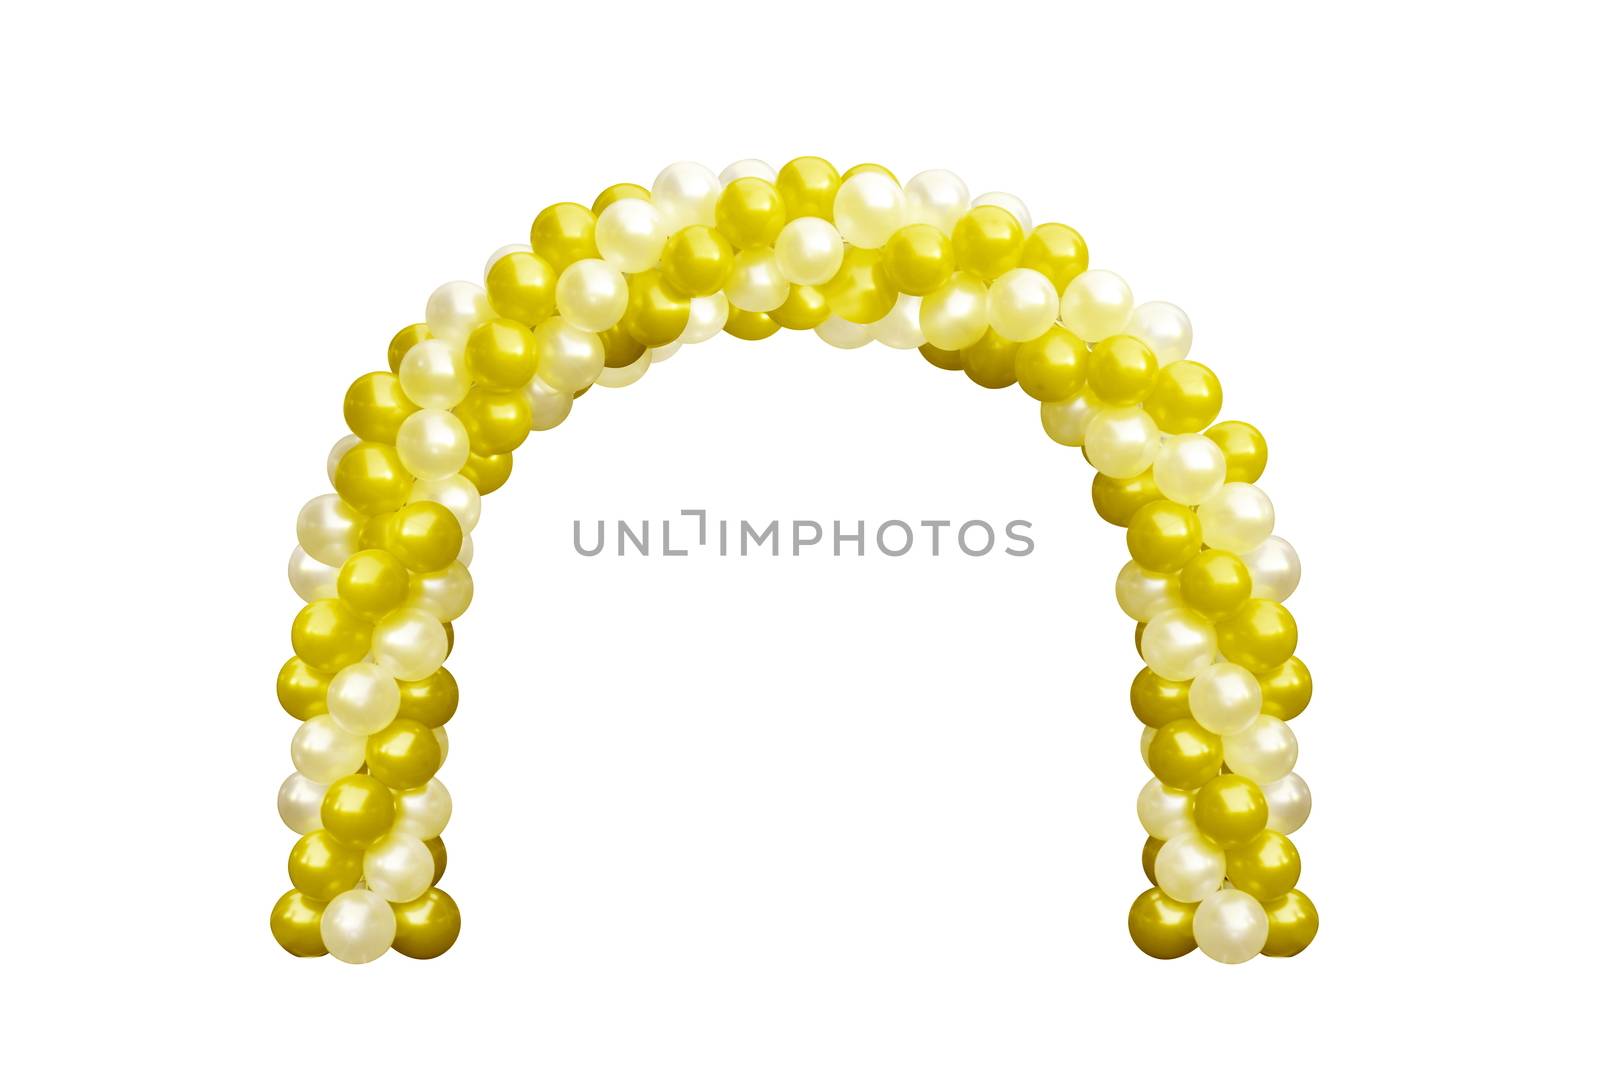 Balloon Archway door Yellow Gold and white, Arches wedding, Balloon Festival design decoration elements with arch floral design isolated on white Background